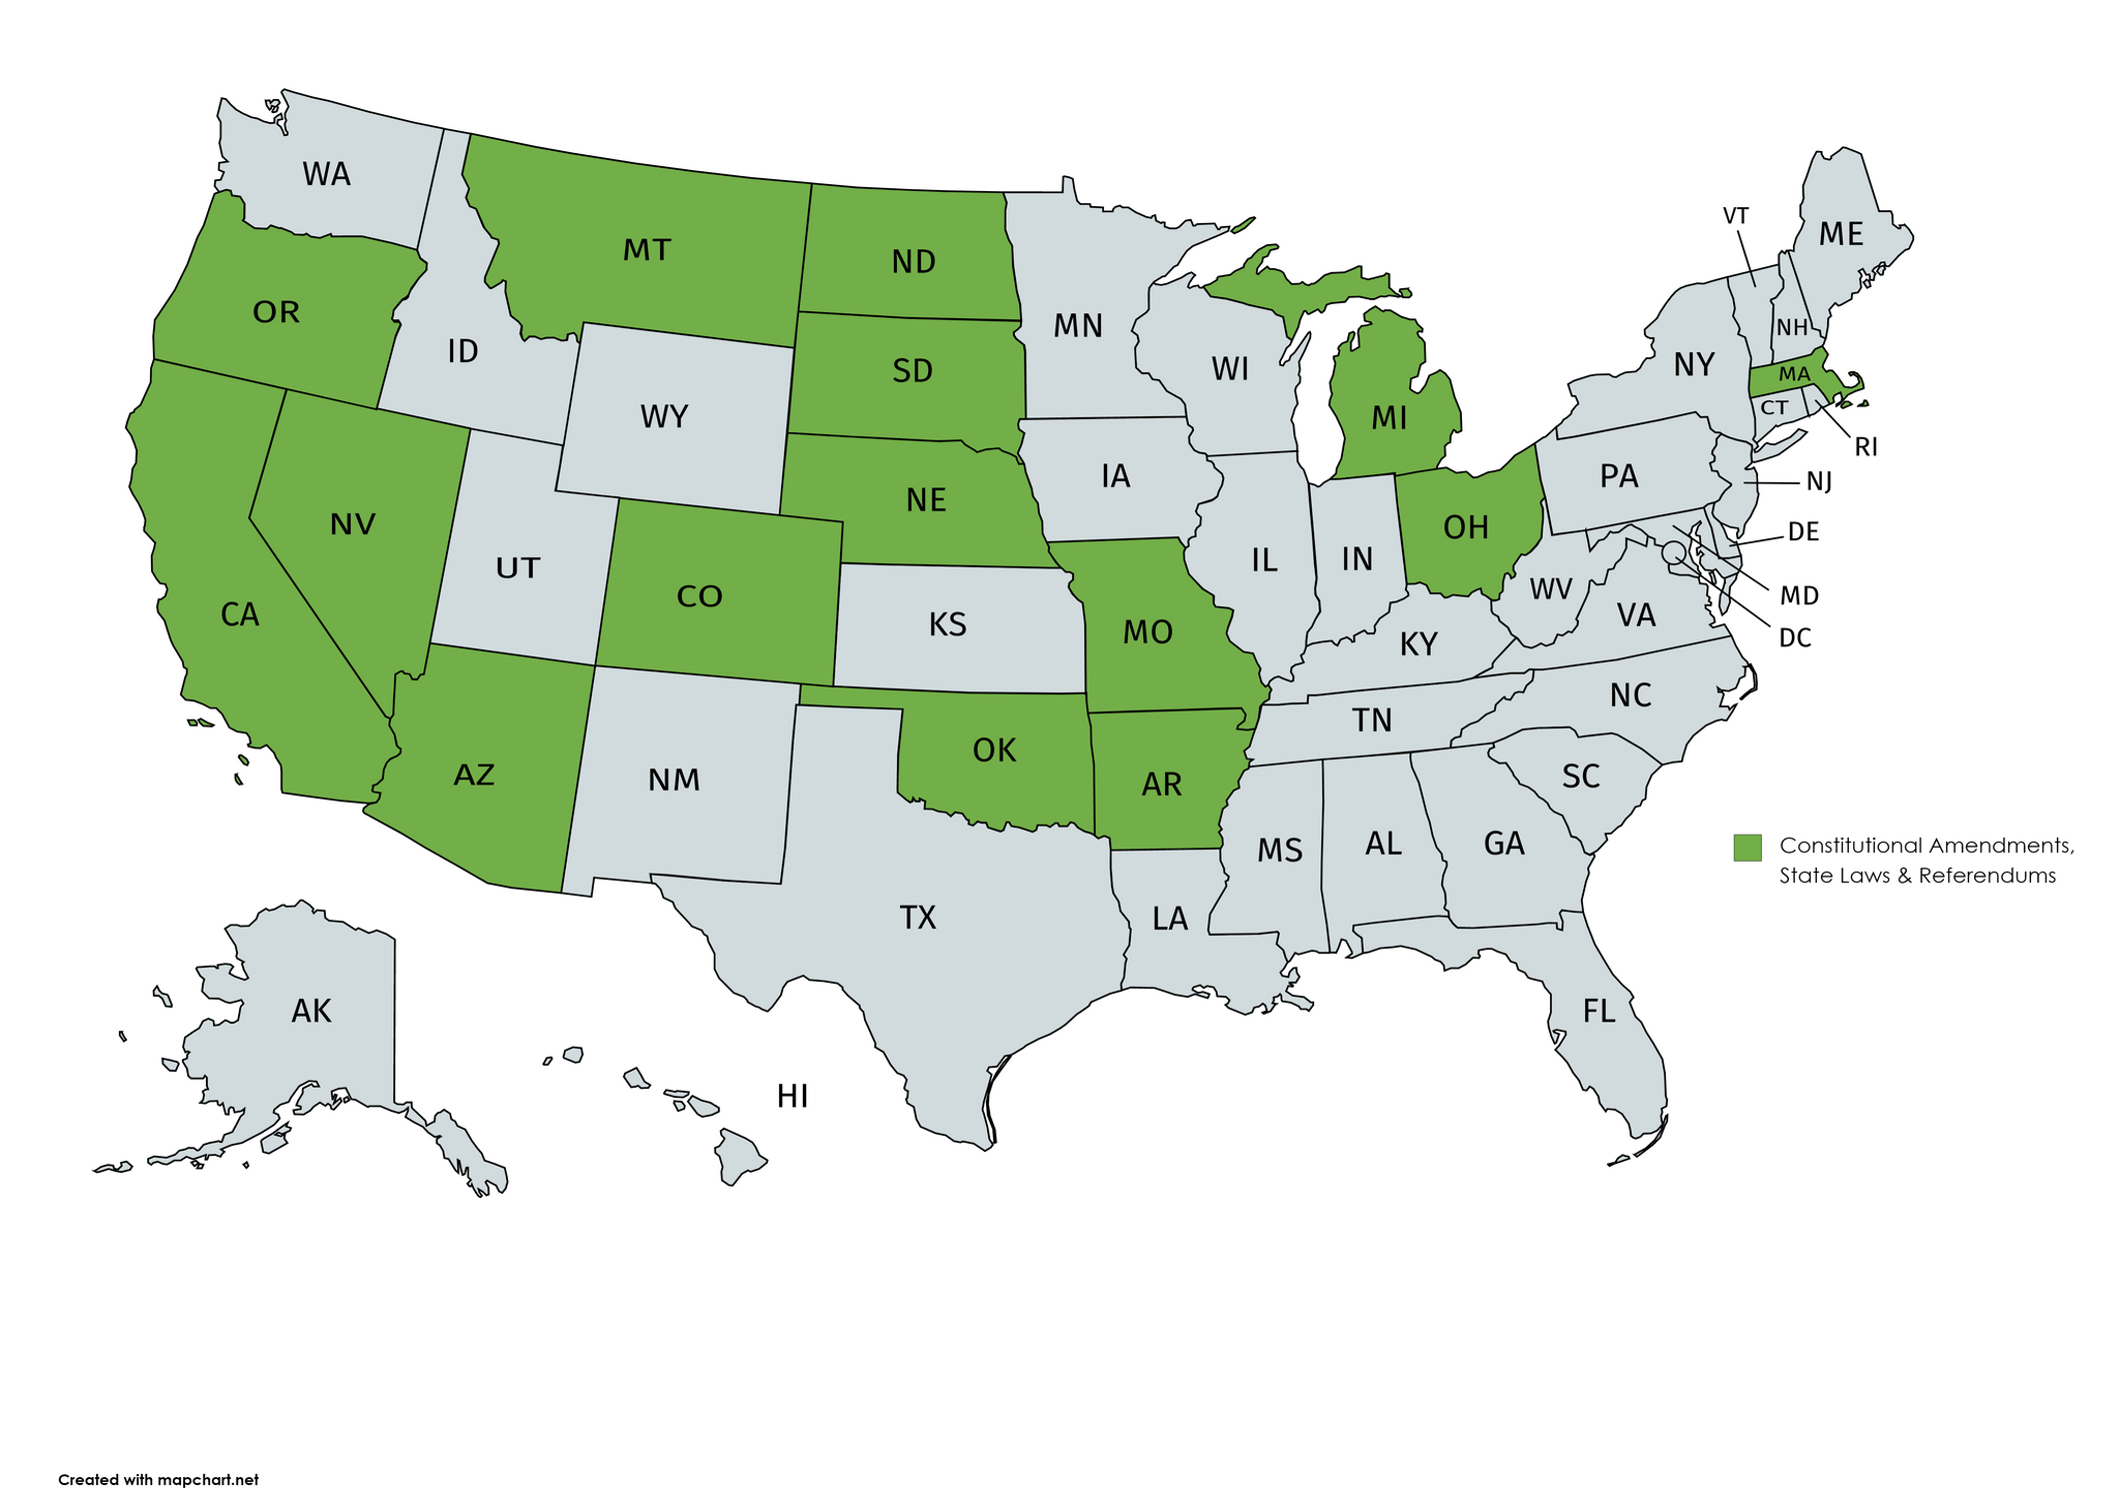 Map of U.S. states where citizens can put on the ballot a proposed constitutional amendment, state law and referendum. See list below for those states.